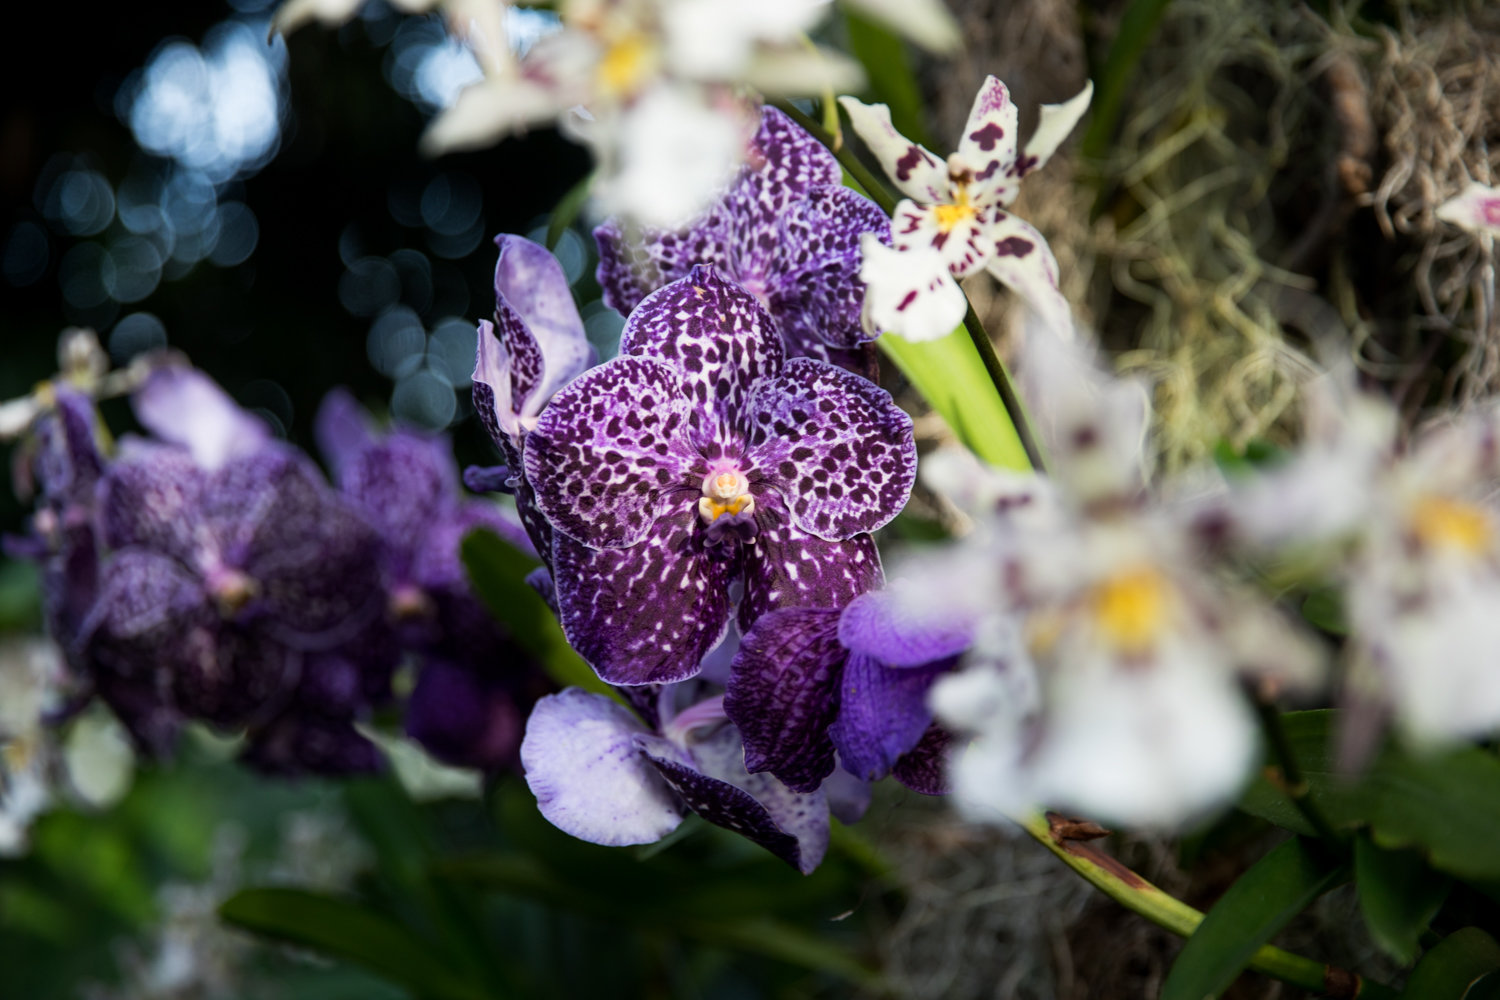 The Sunanda Jeff Leatham is an orchid of the Vanda variety named for the famed floral designer Jeff Leatham, who designed this year's orchid show at the New York Botanical Garden. It’s on display through April 19.